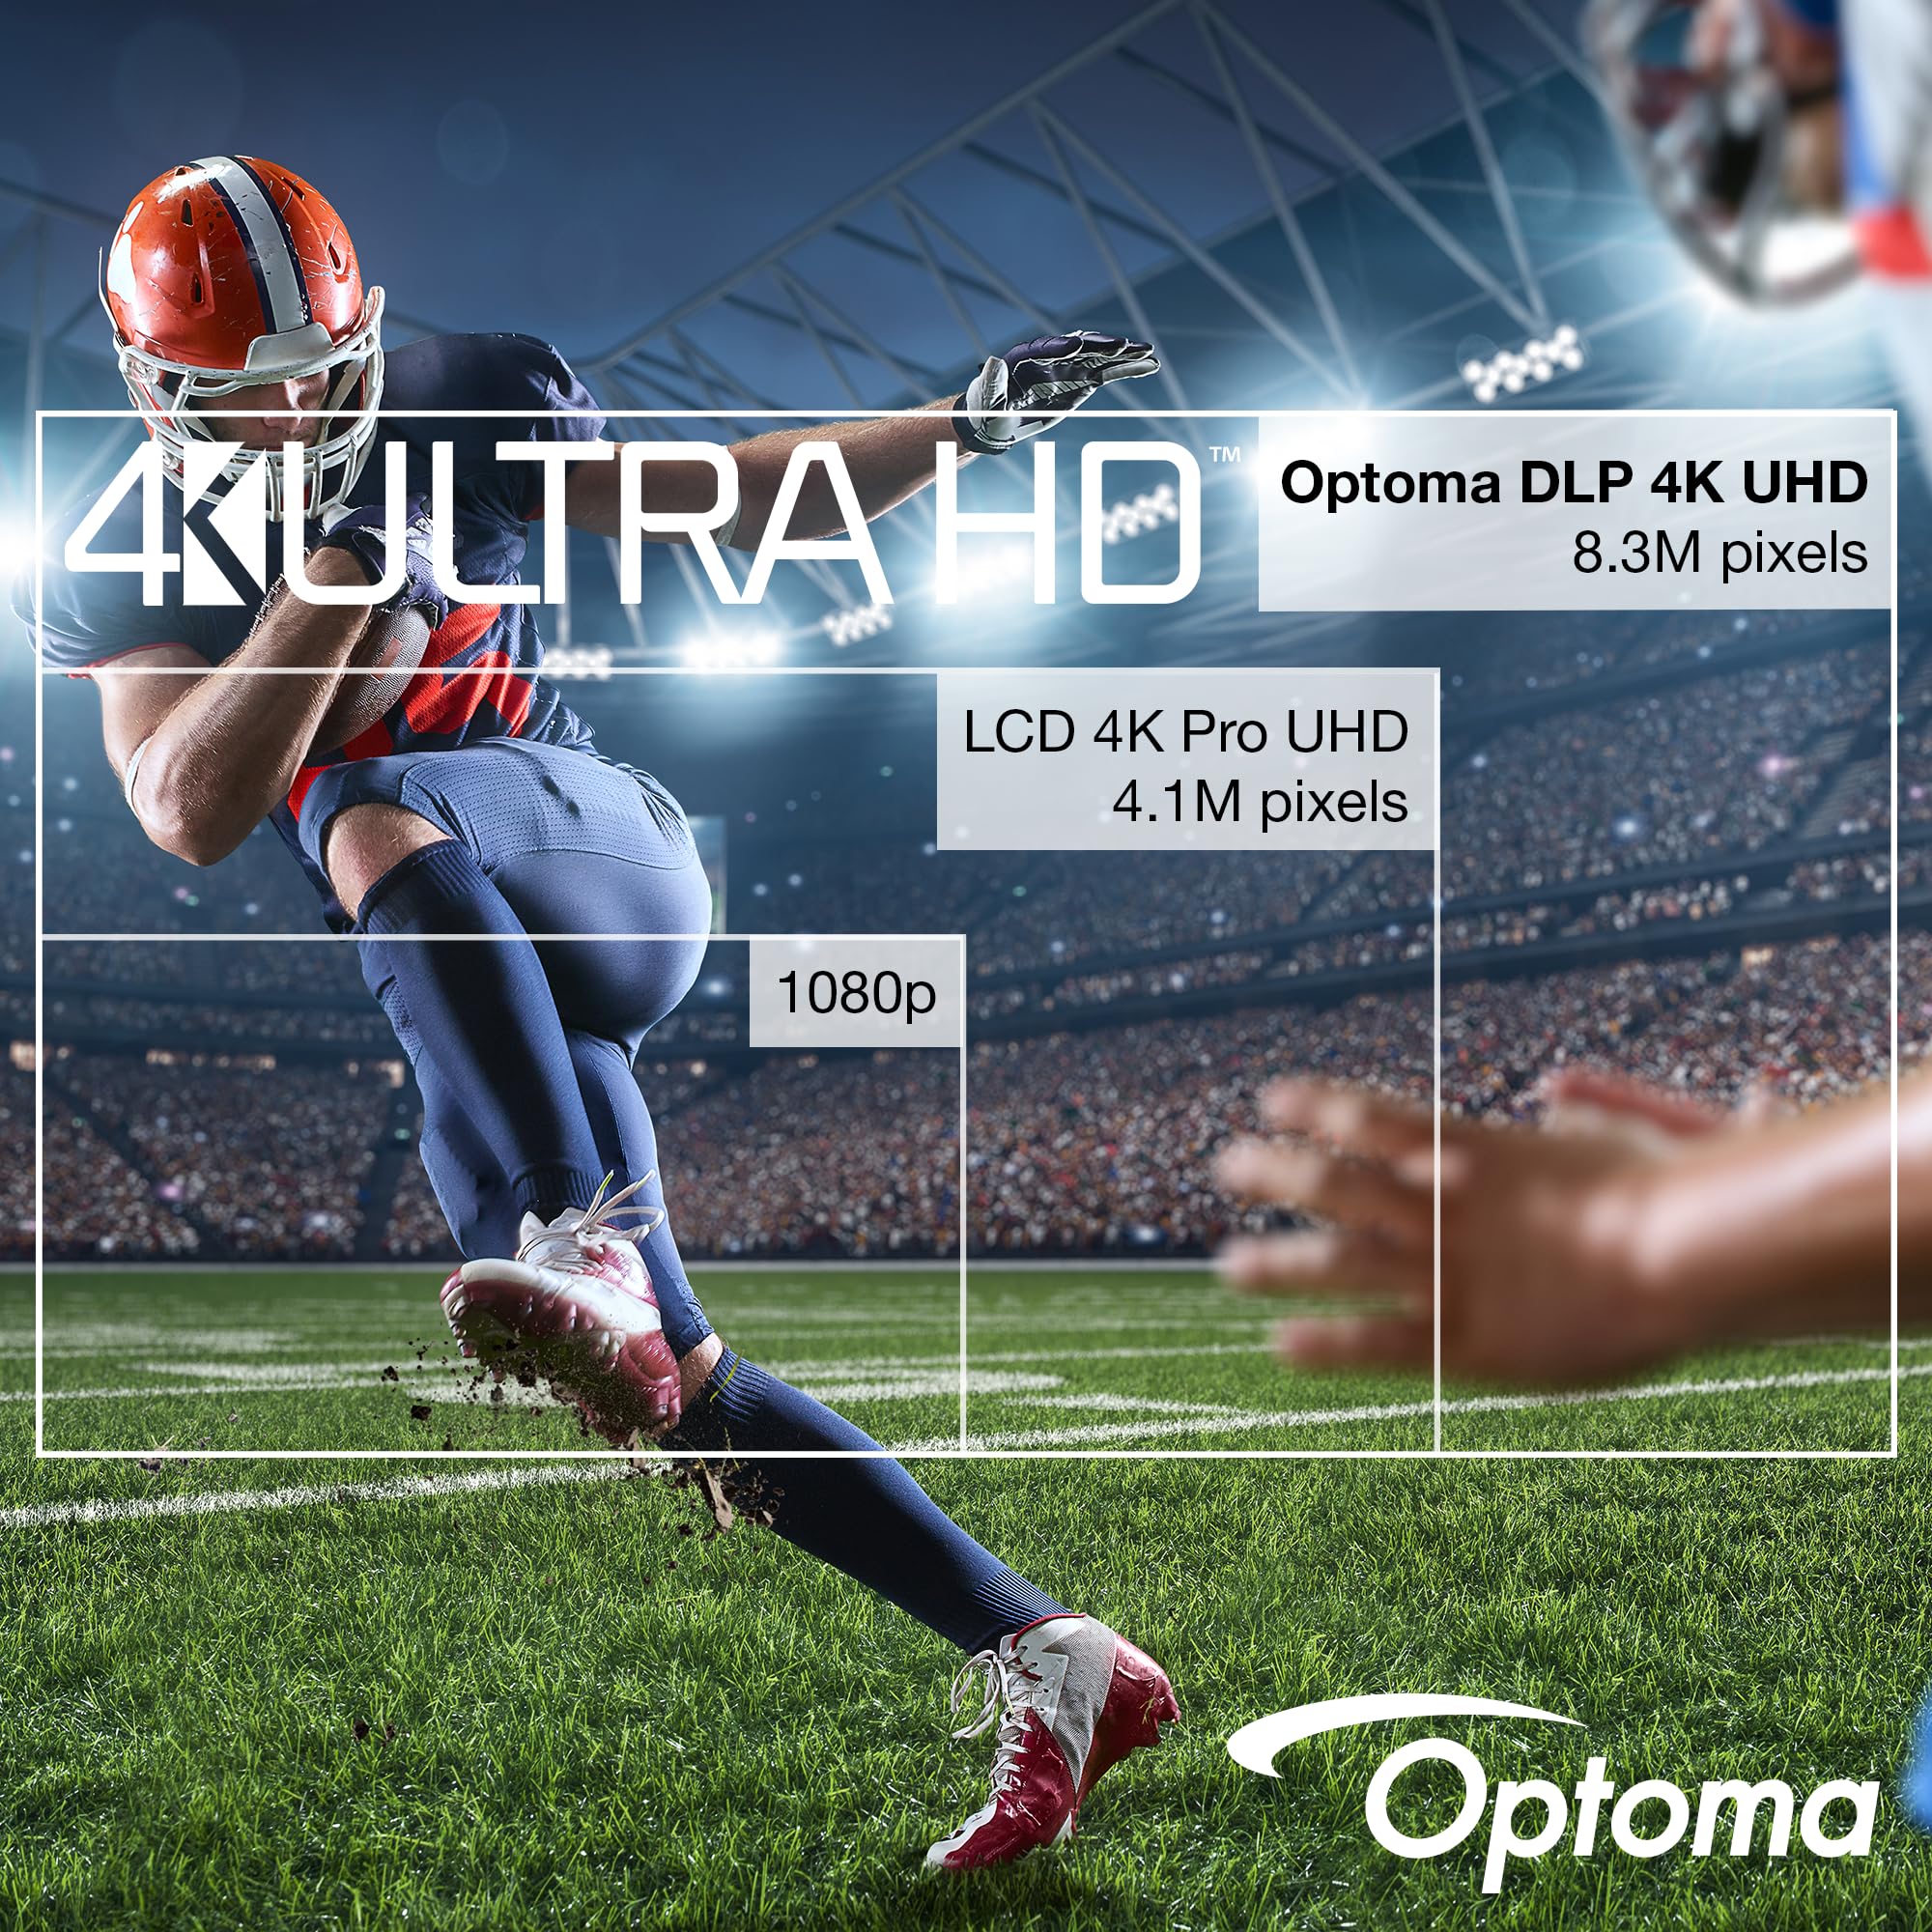 Optoma UHZ66 Compact Long Throw True 4K UHD Laser Home Cinema and Gaming Projector, 4000 Lumens